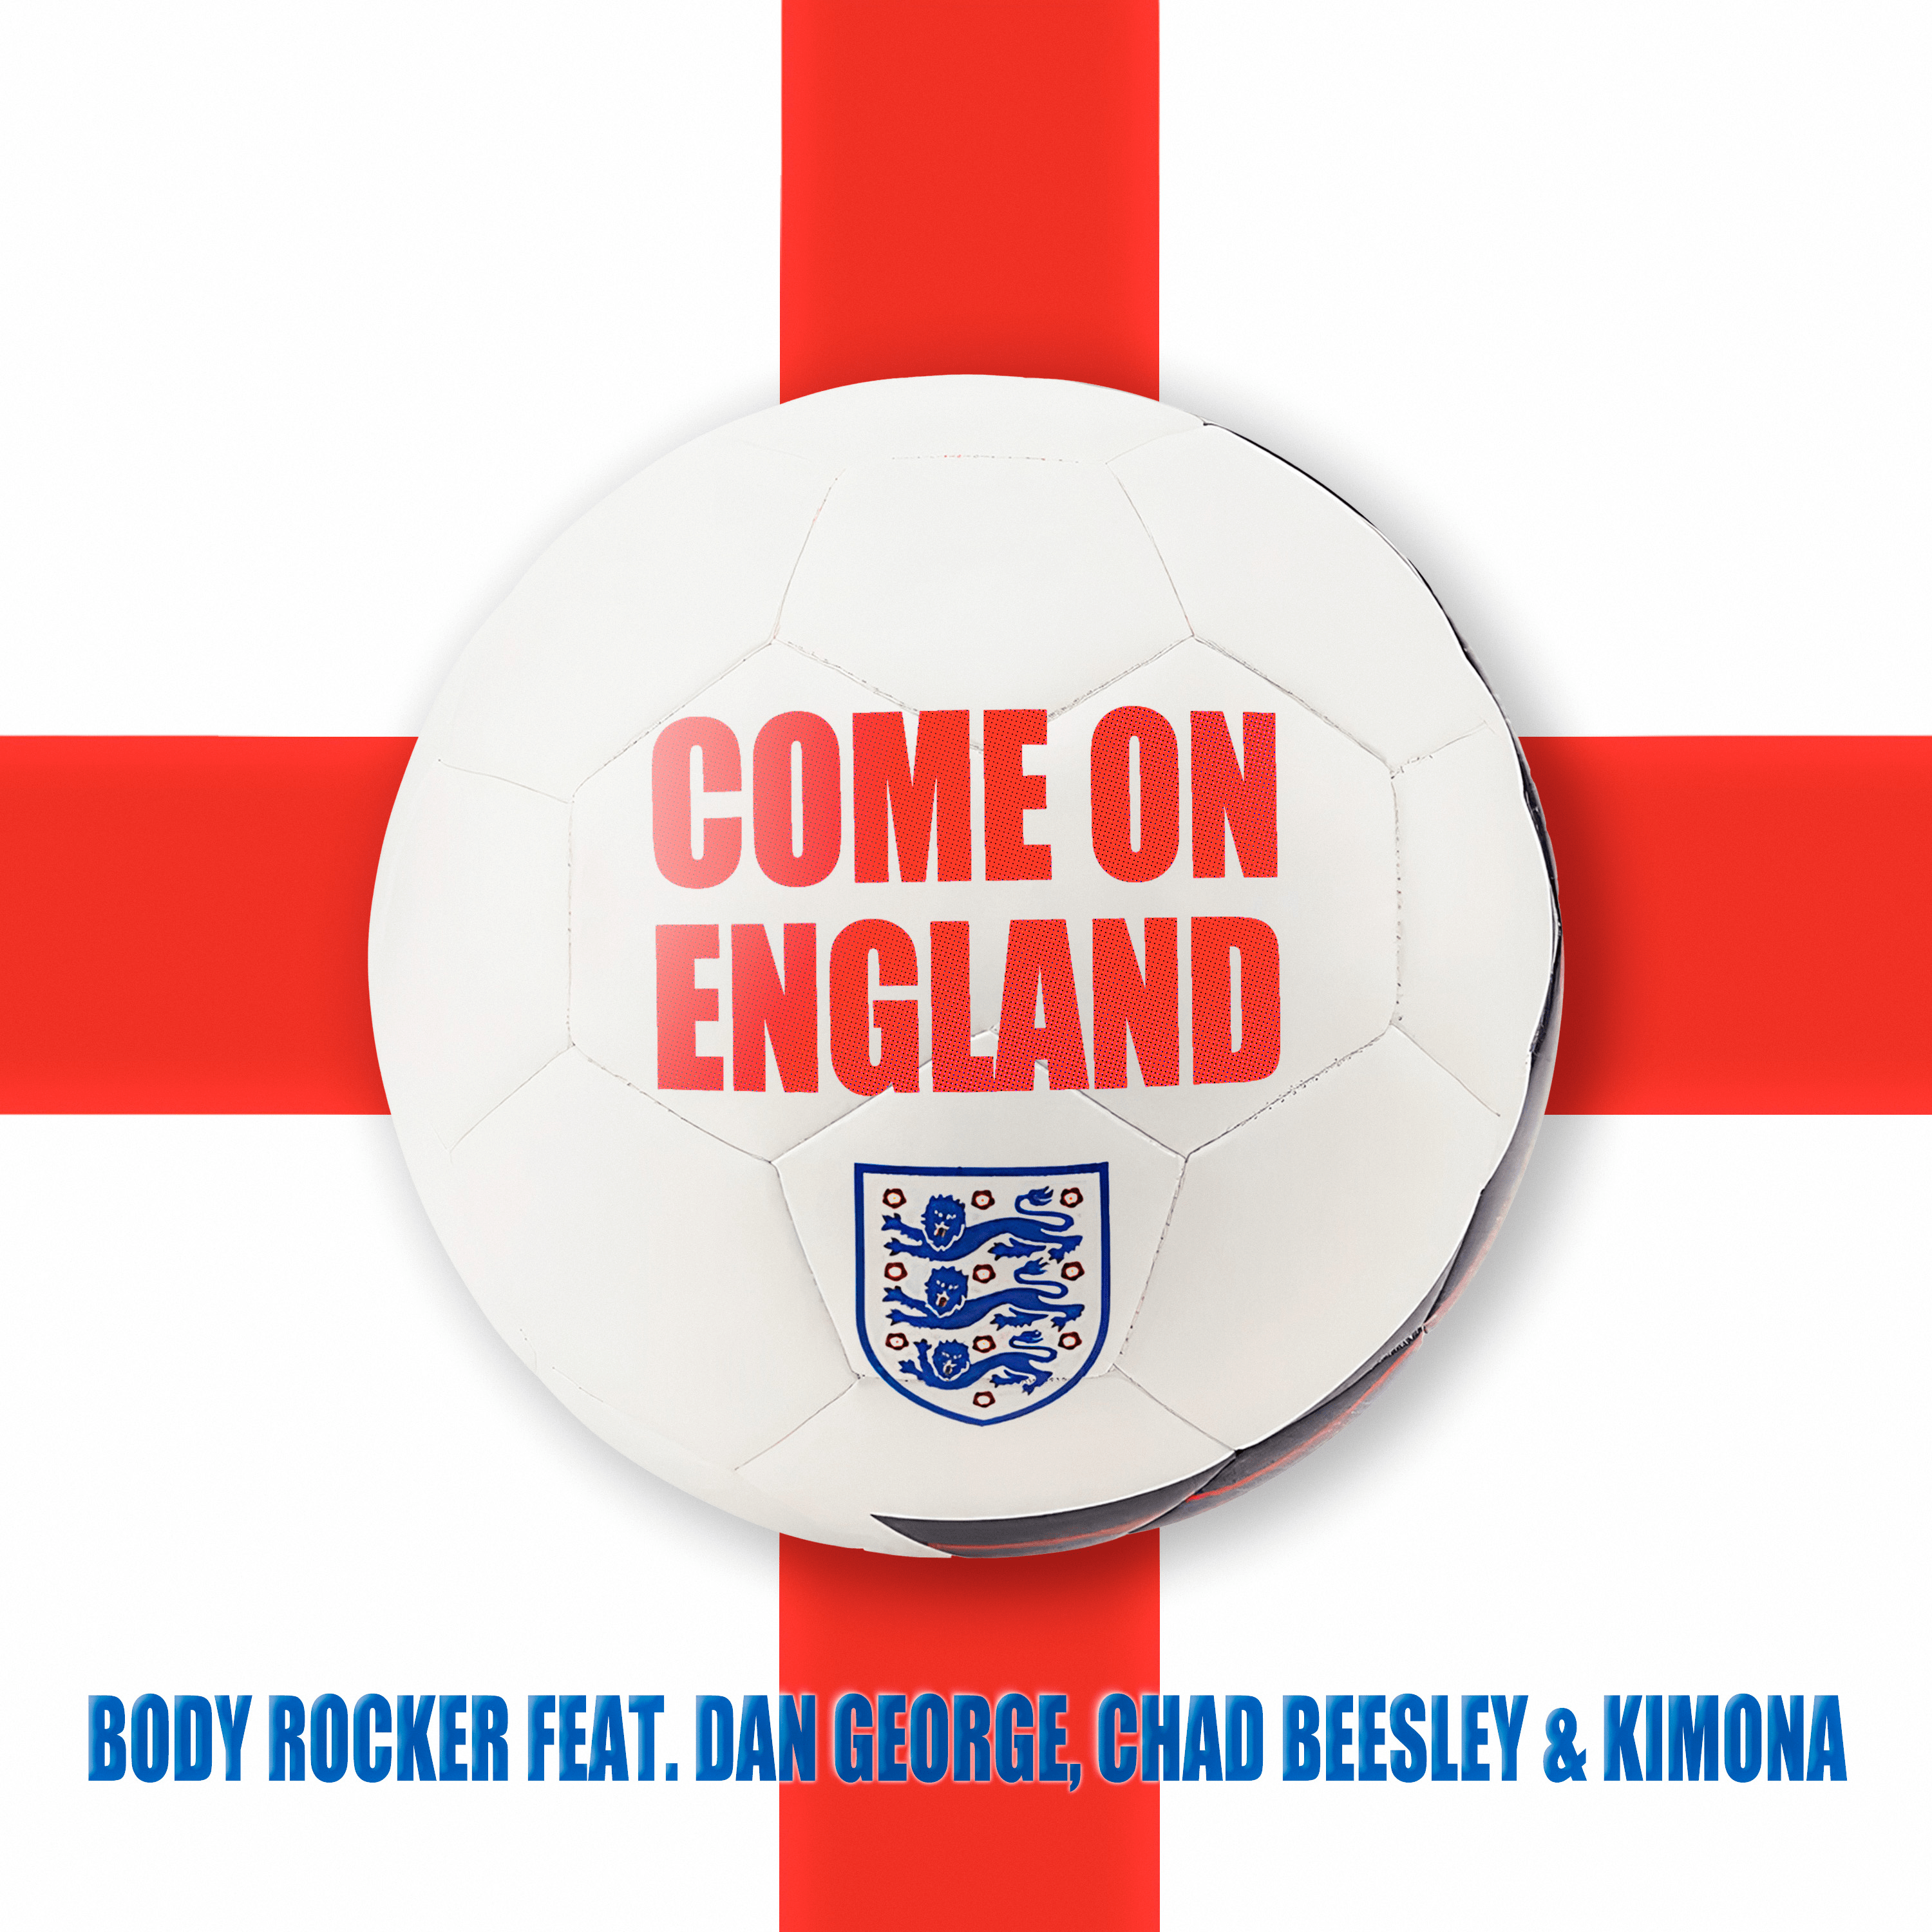 Body Rocker believes that the song "come on England" will help motivate the England national football team to bring back home the cup in the Euro's 2024